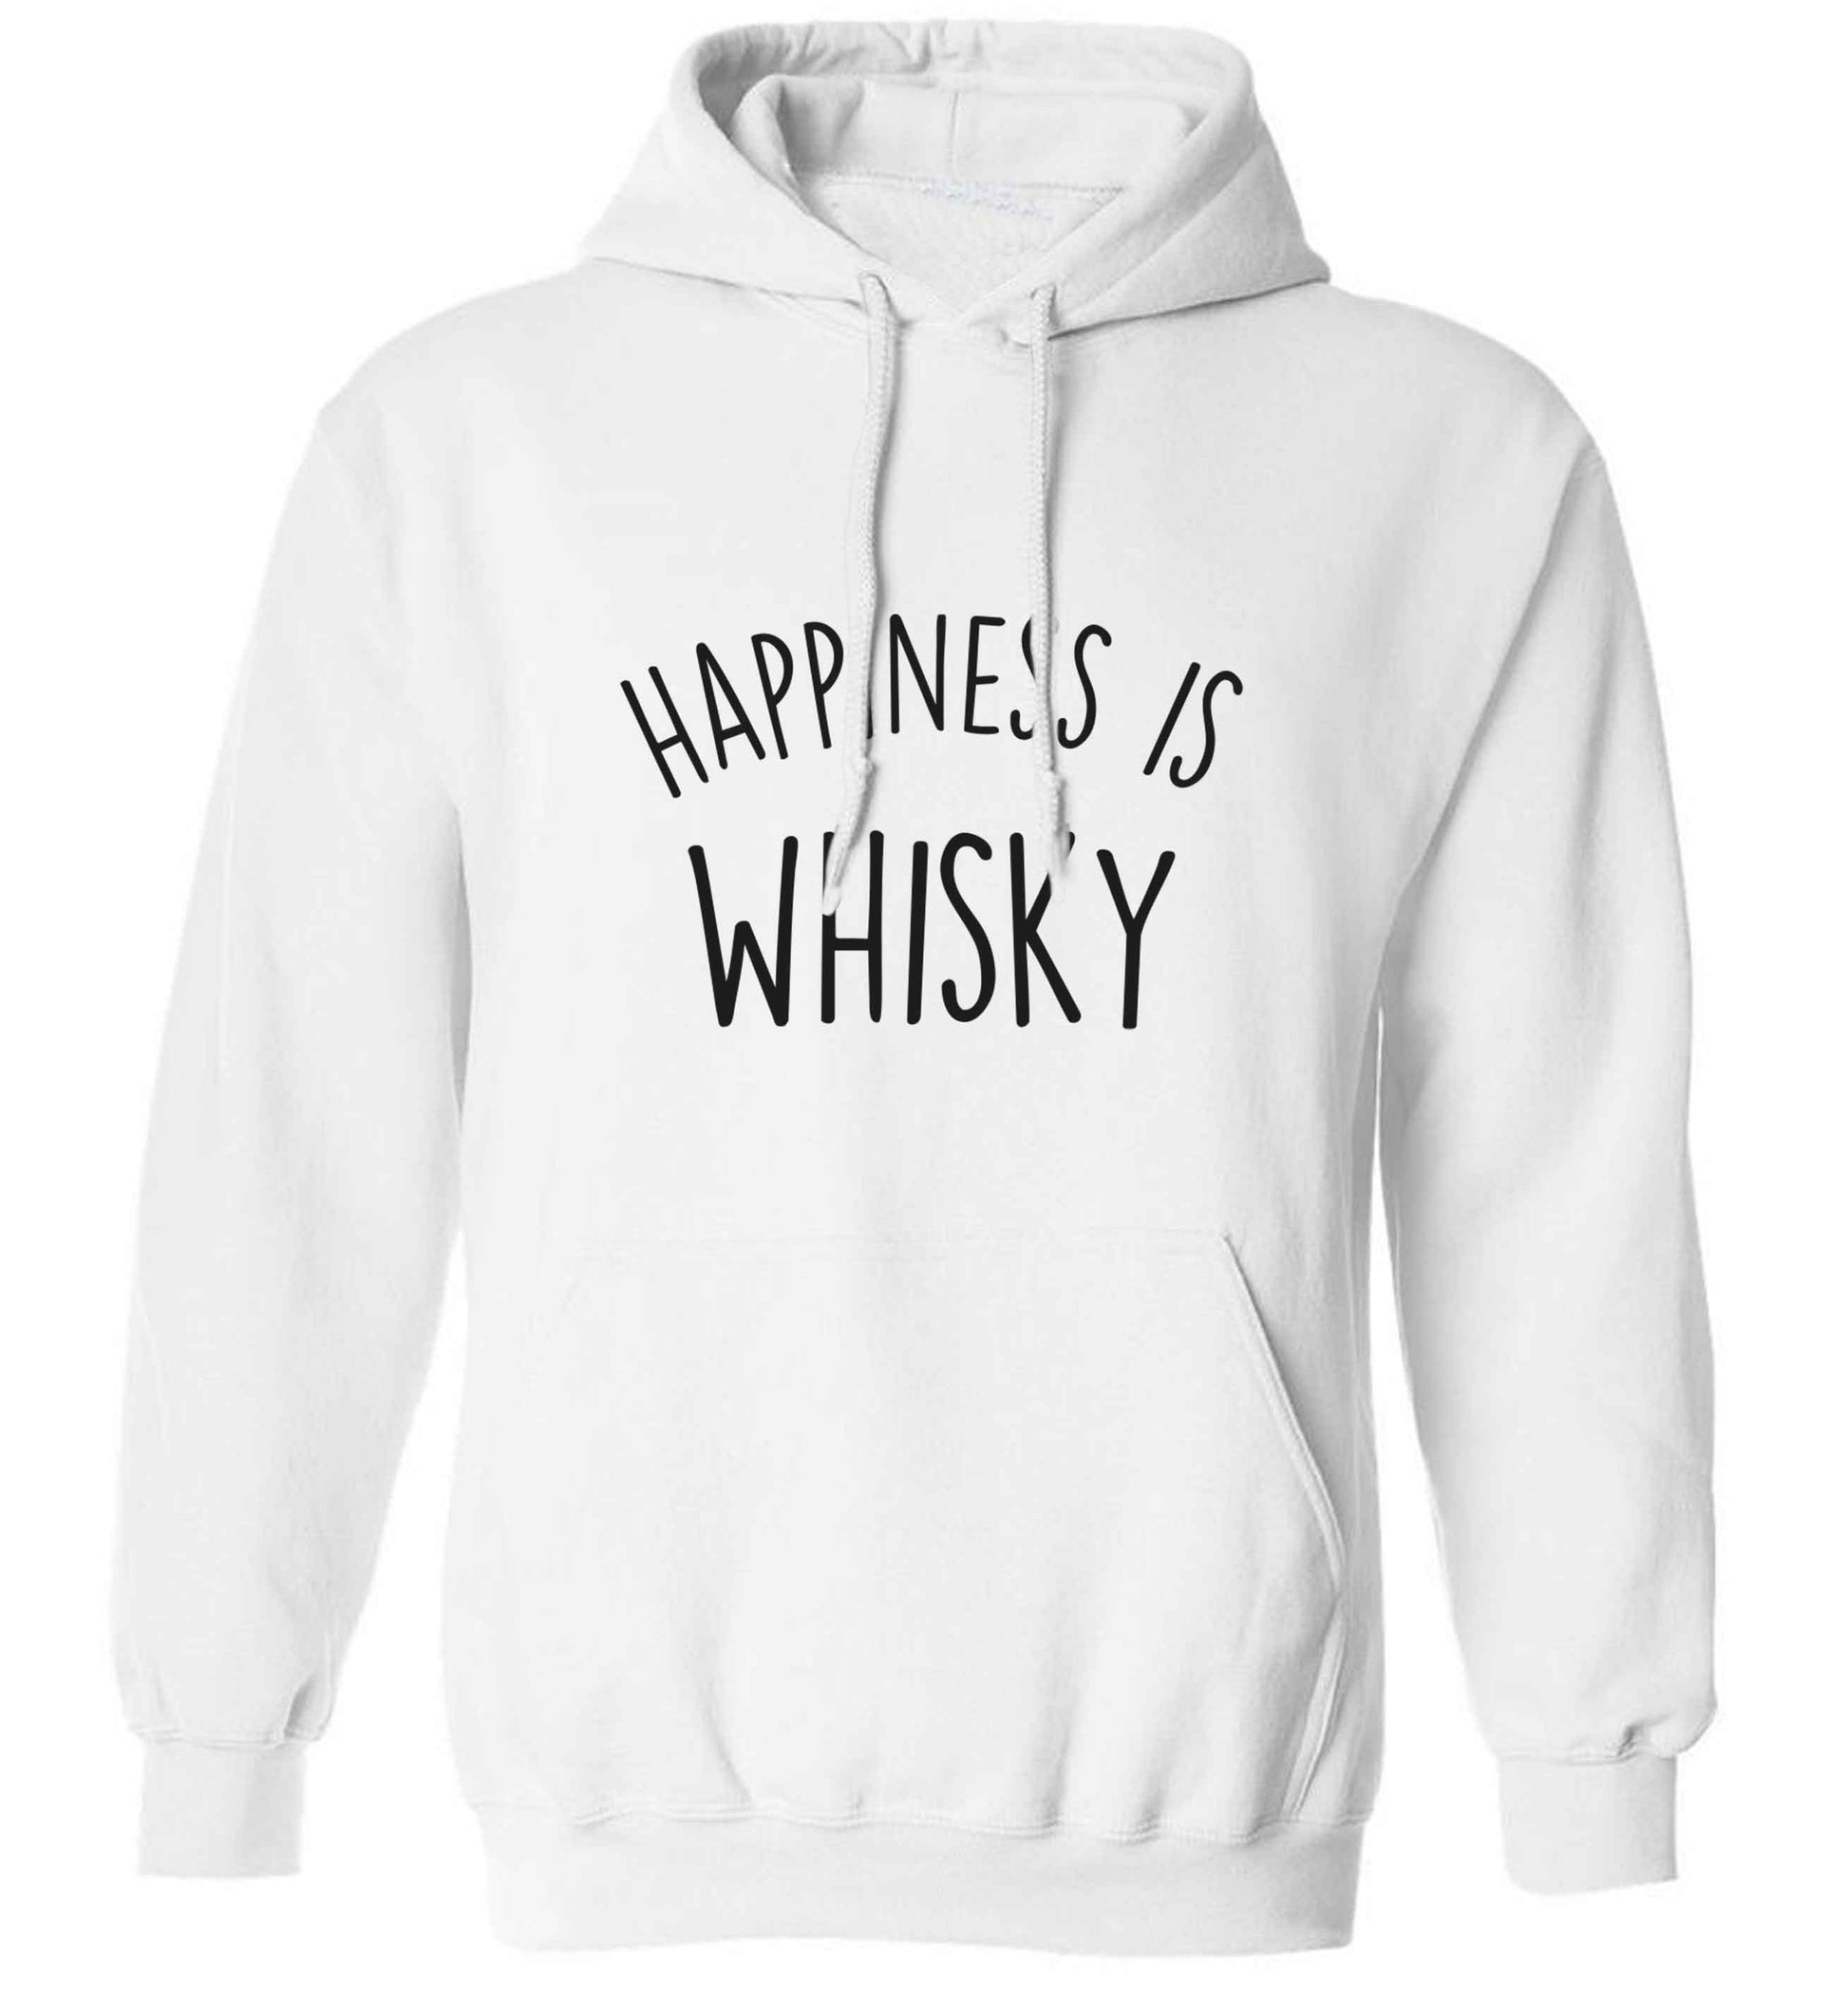 Happiness is whisky adults unisex white hoodie 2XL